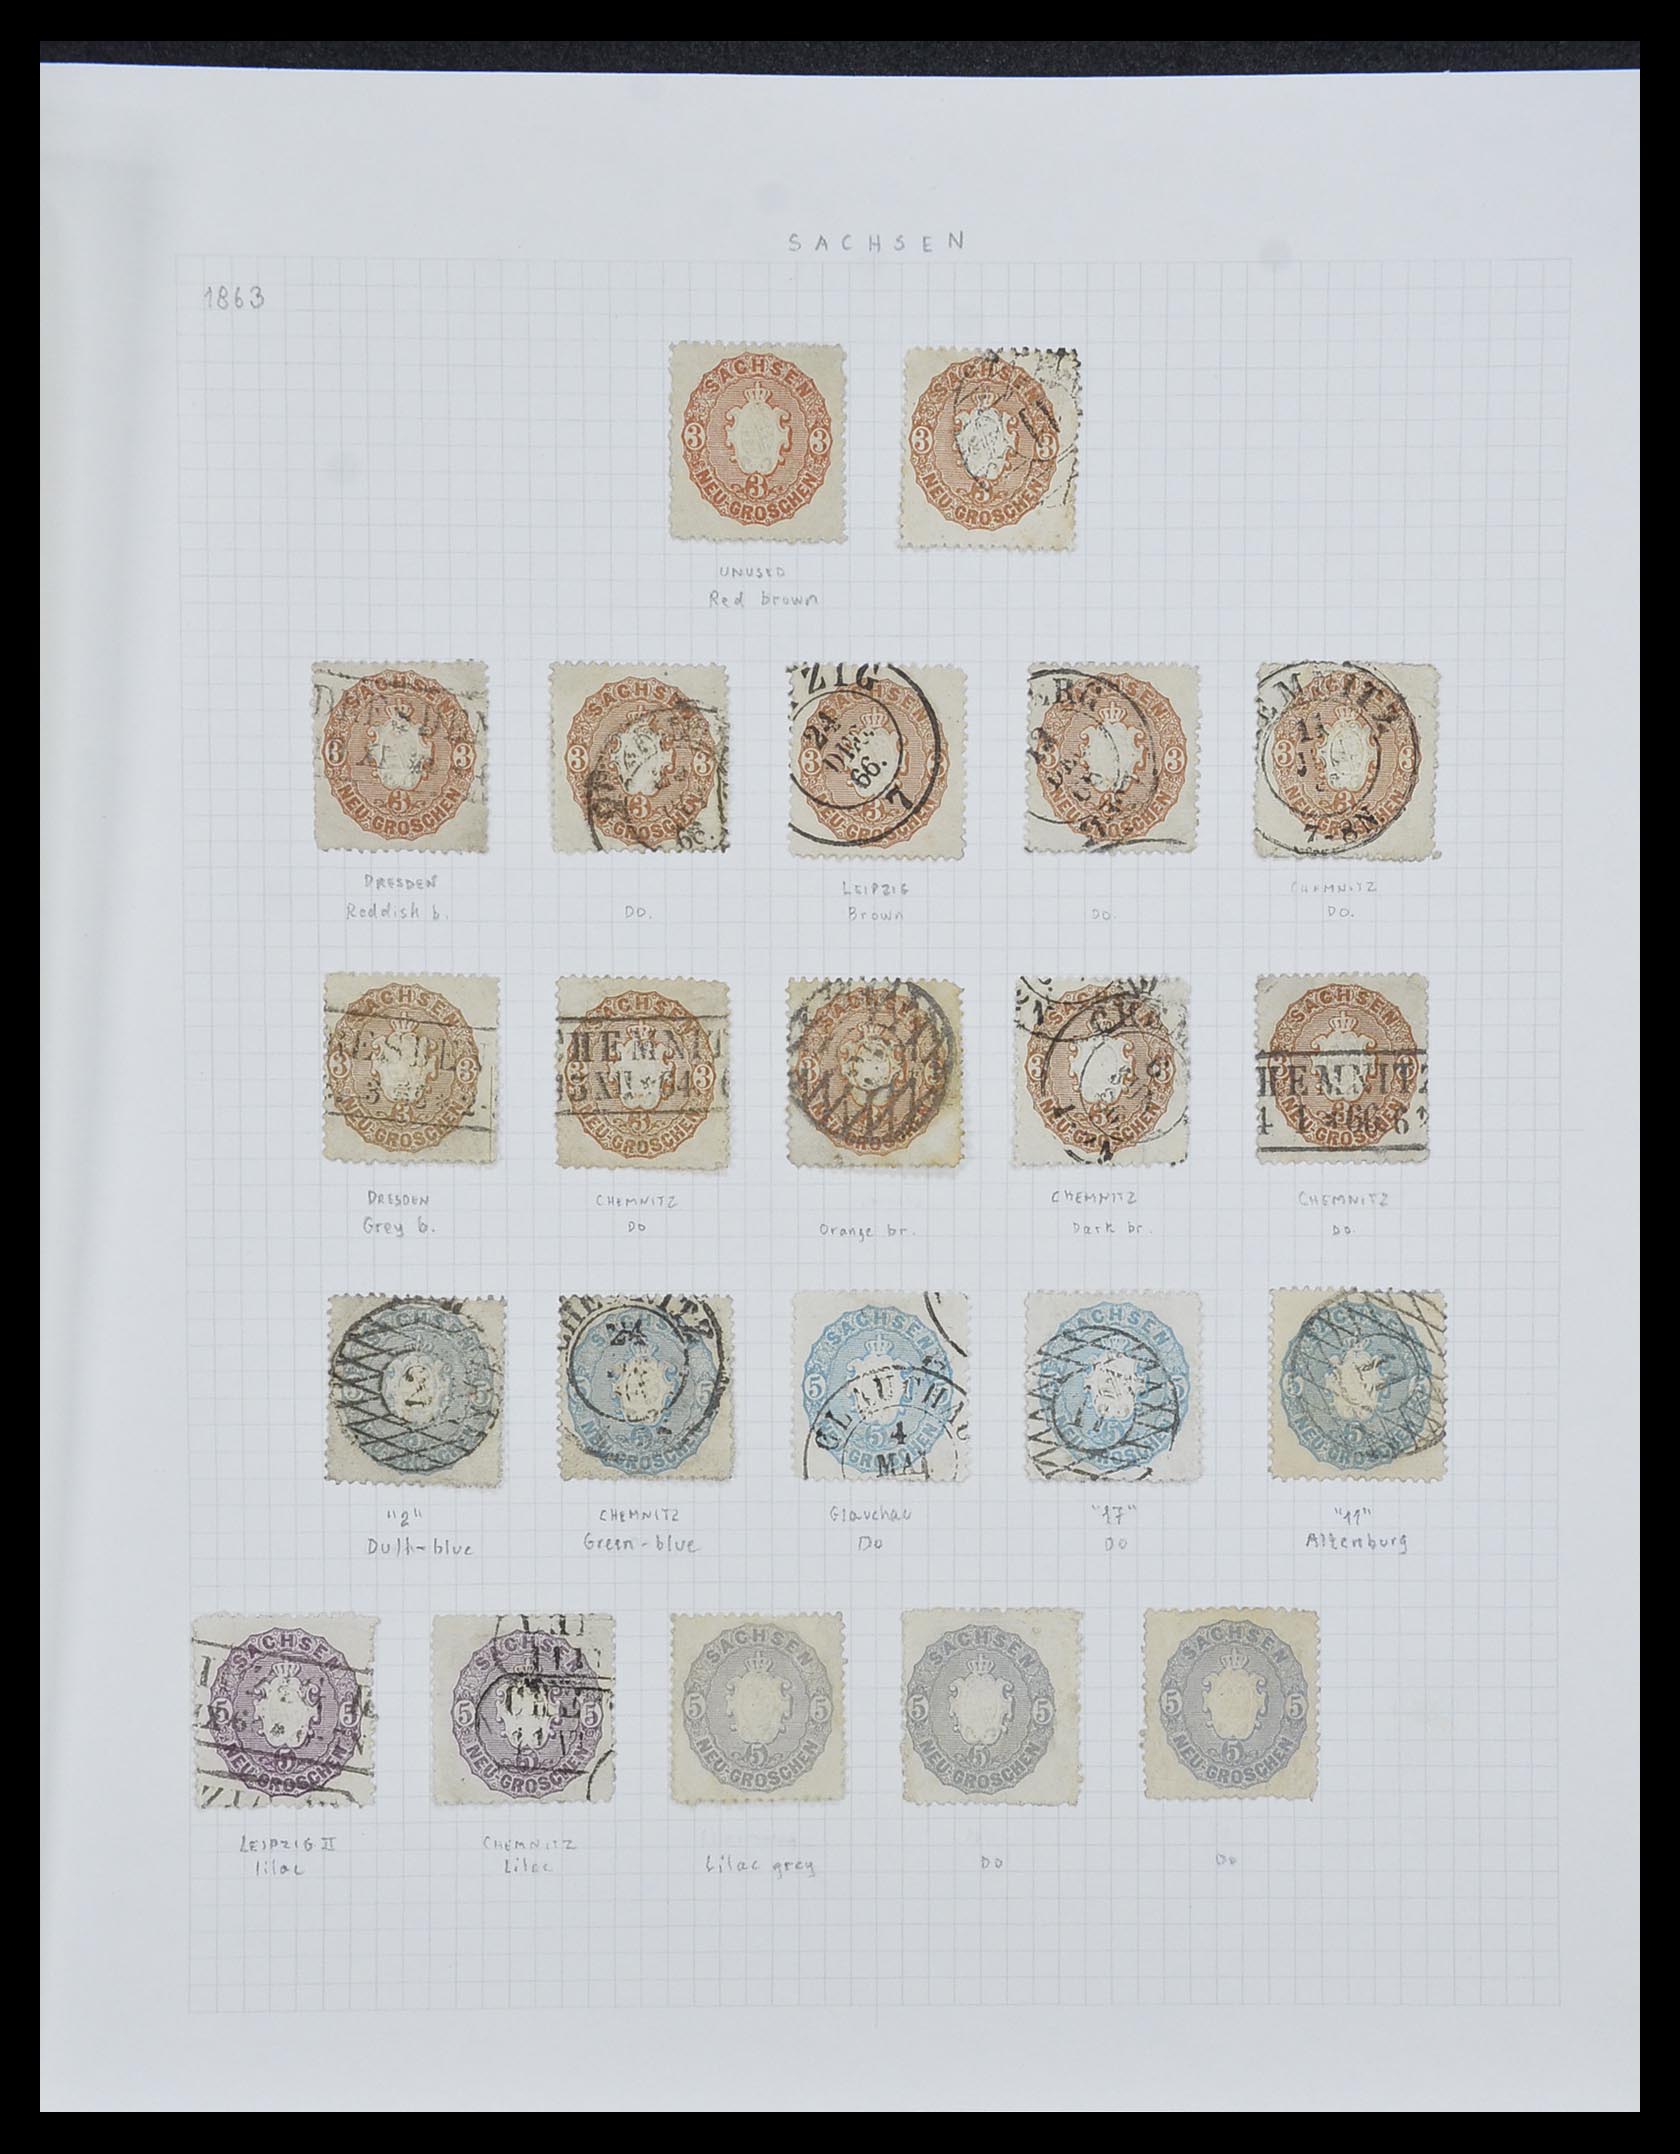 33966 008 - Stamp collection 33966 Saxony 1851-1863.